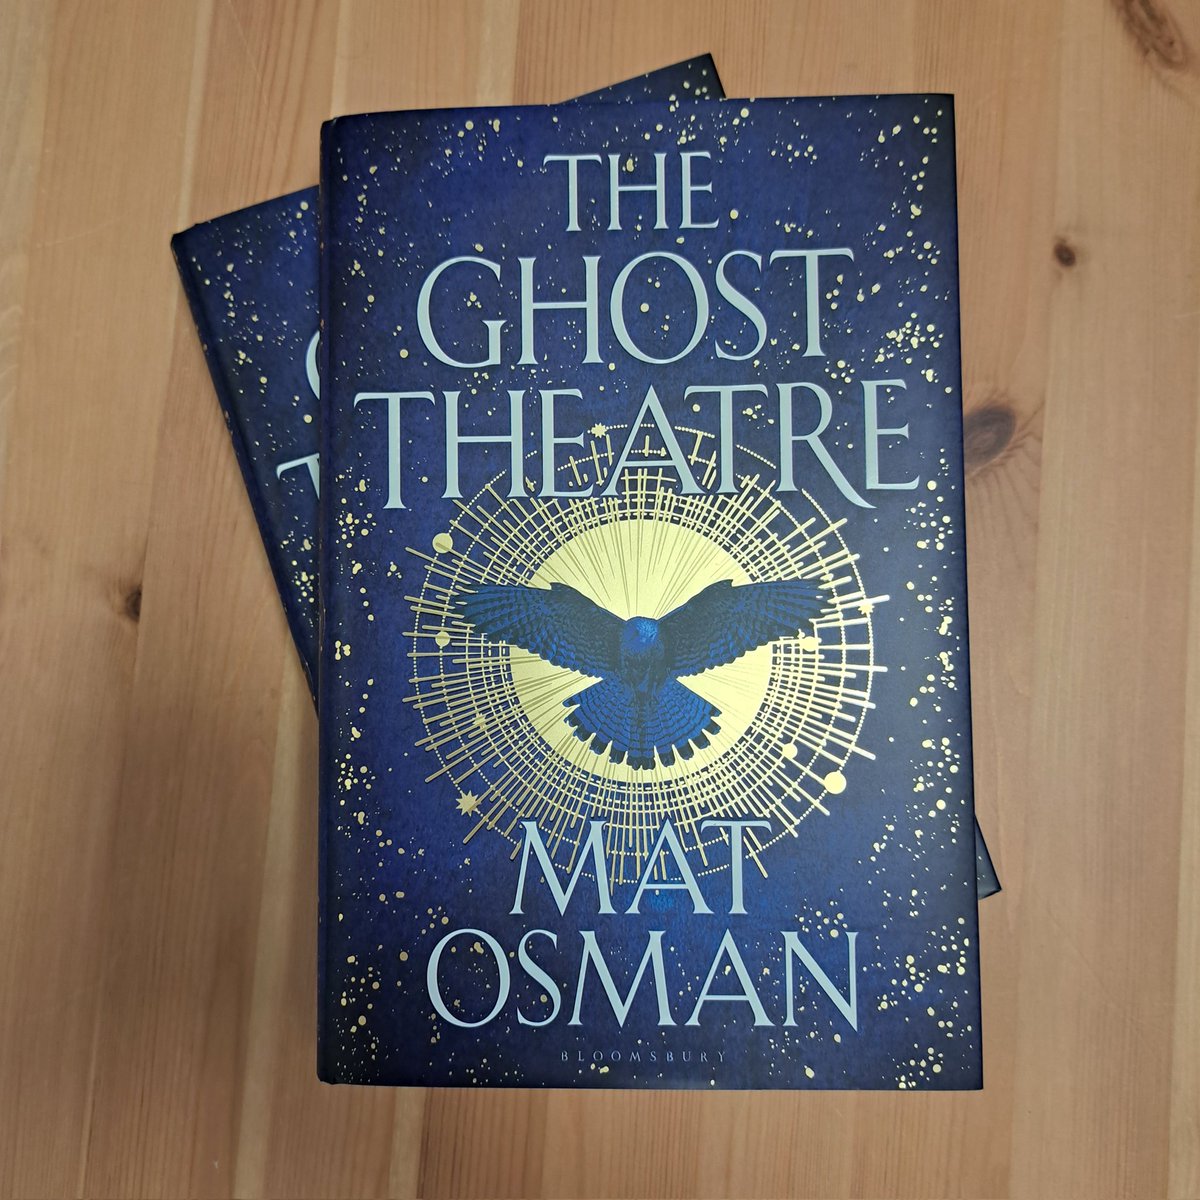 The Ghost Theatre is out now. A beautifully written, evocative novel set in an alternative Elizabethan London. It's utterly gripping! bit.ly/3pyhtoO

#theghosttheatre #newfiction #newbooks @BloomsburyBooks @matosman